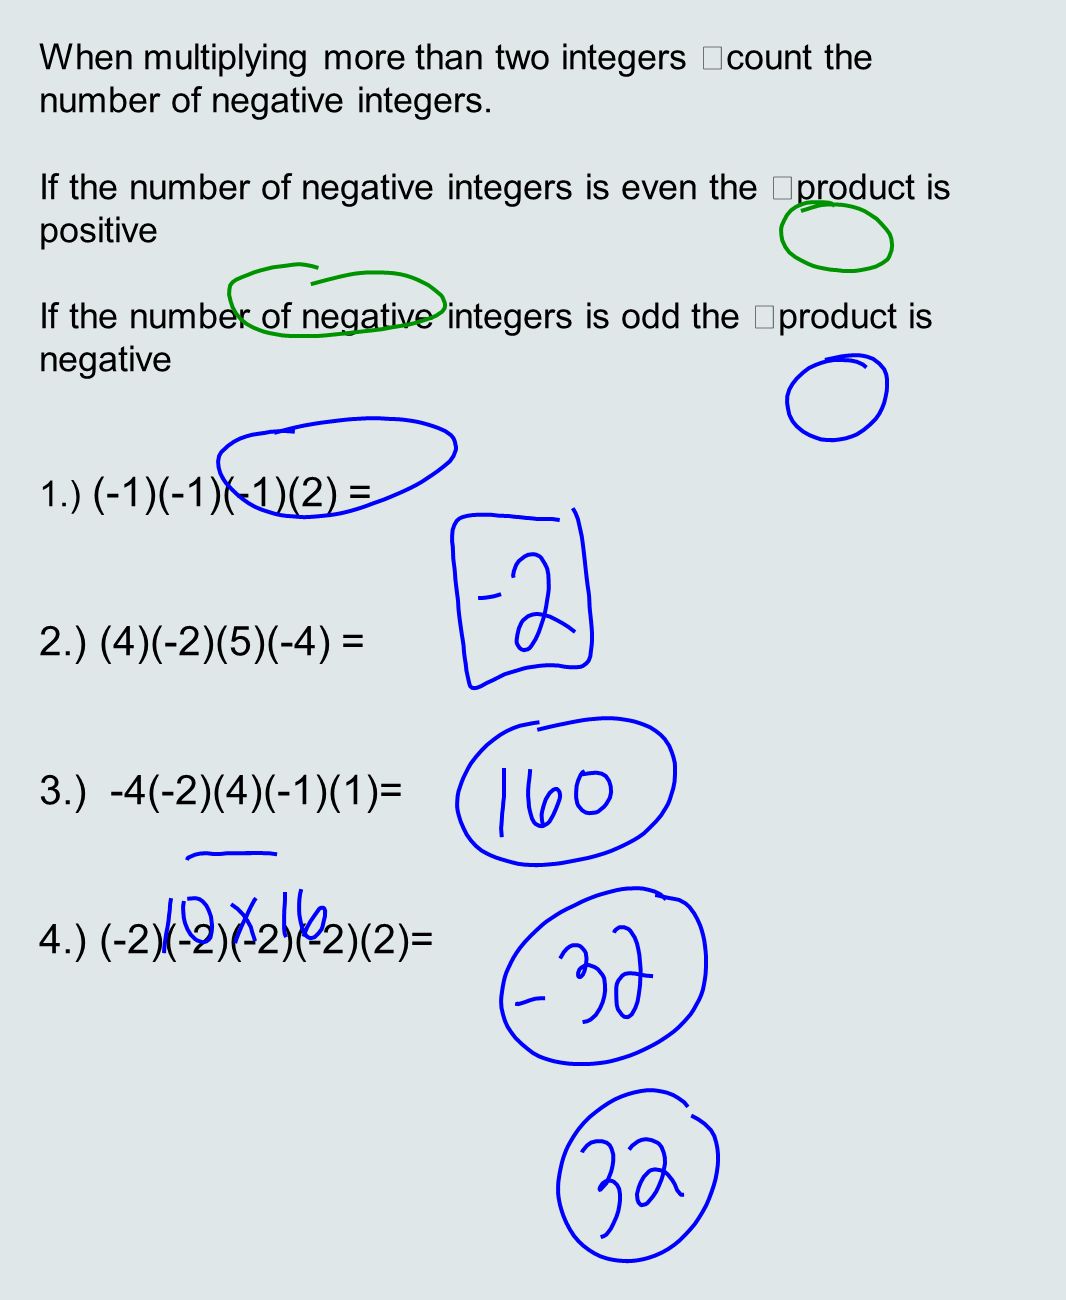 When multiplying more than two integers count the number of negative integers.